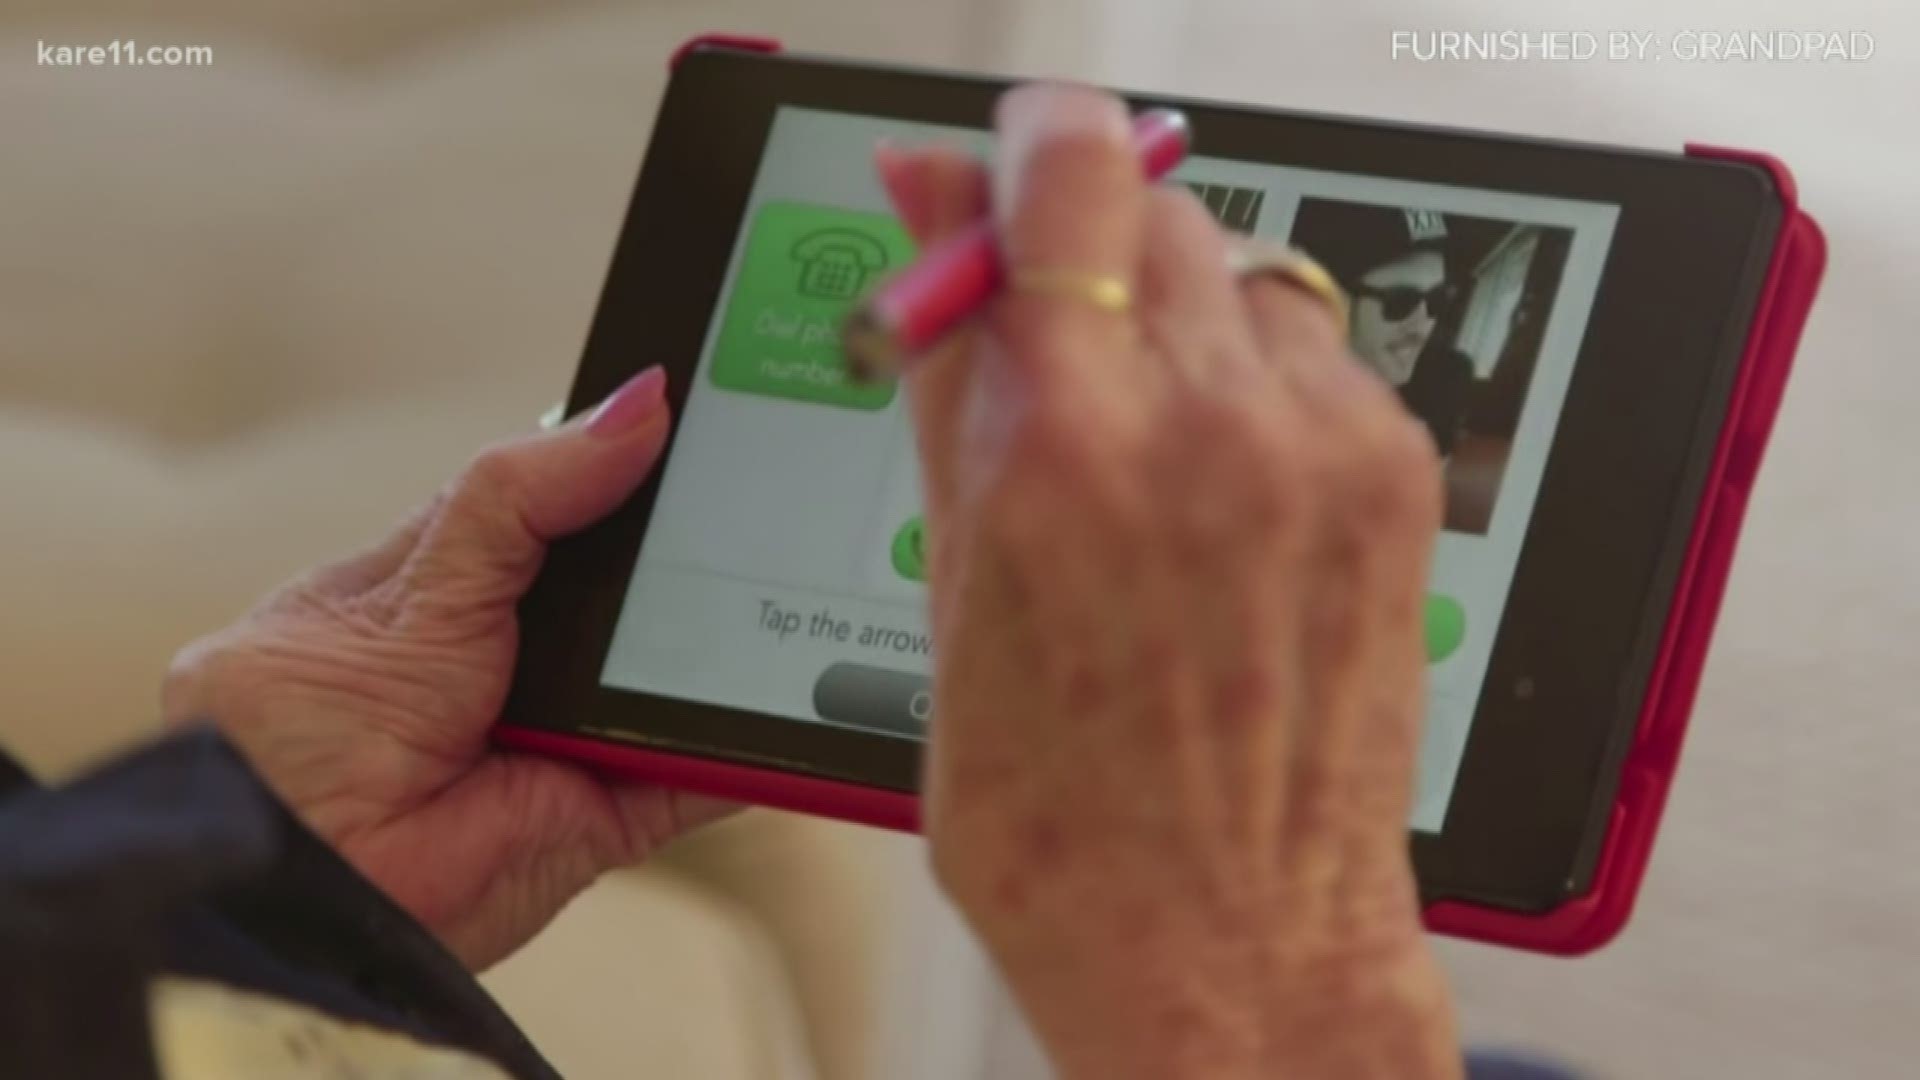 We're now all trying harder to stay connected digitally, and this device can help seniors struggling with technology.